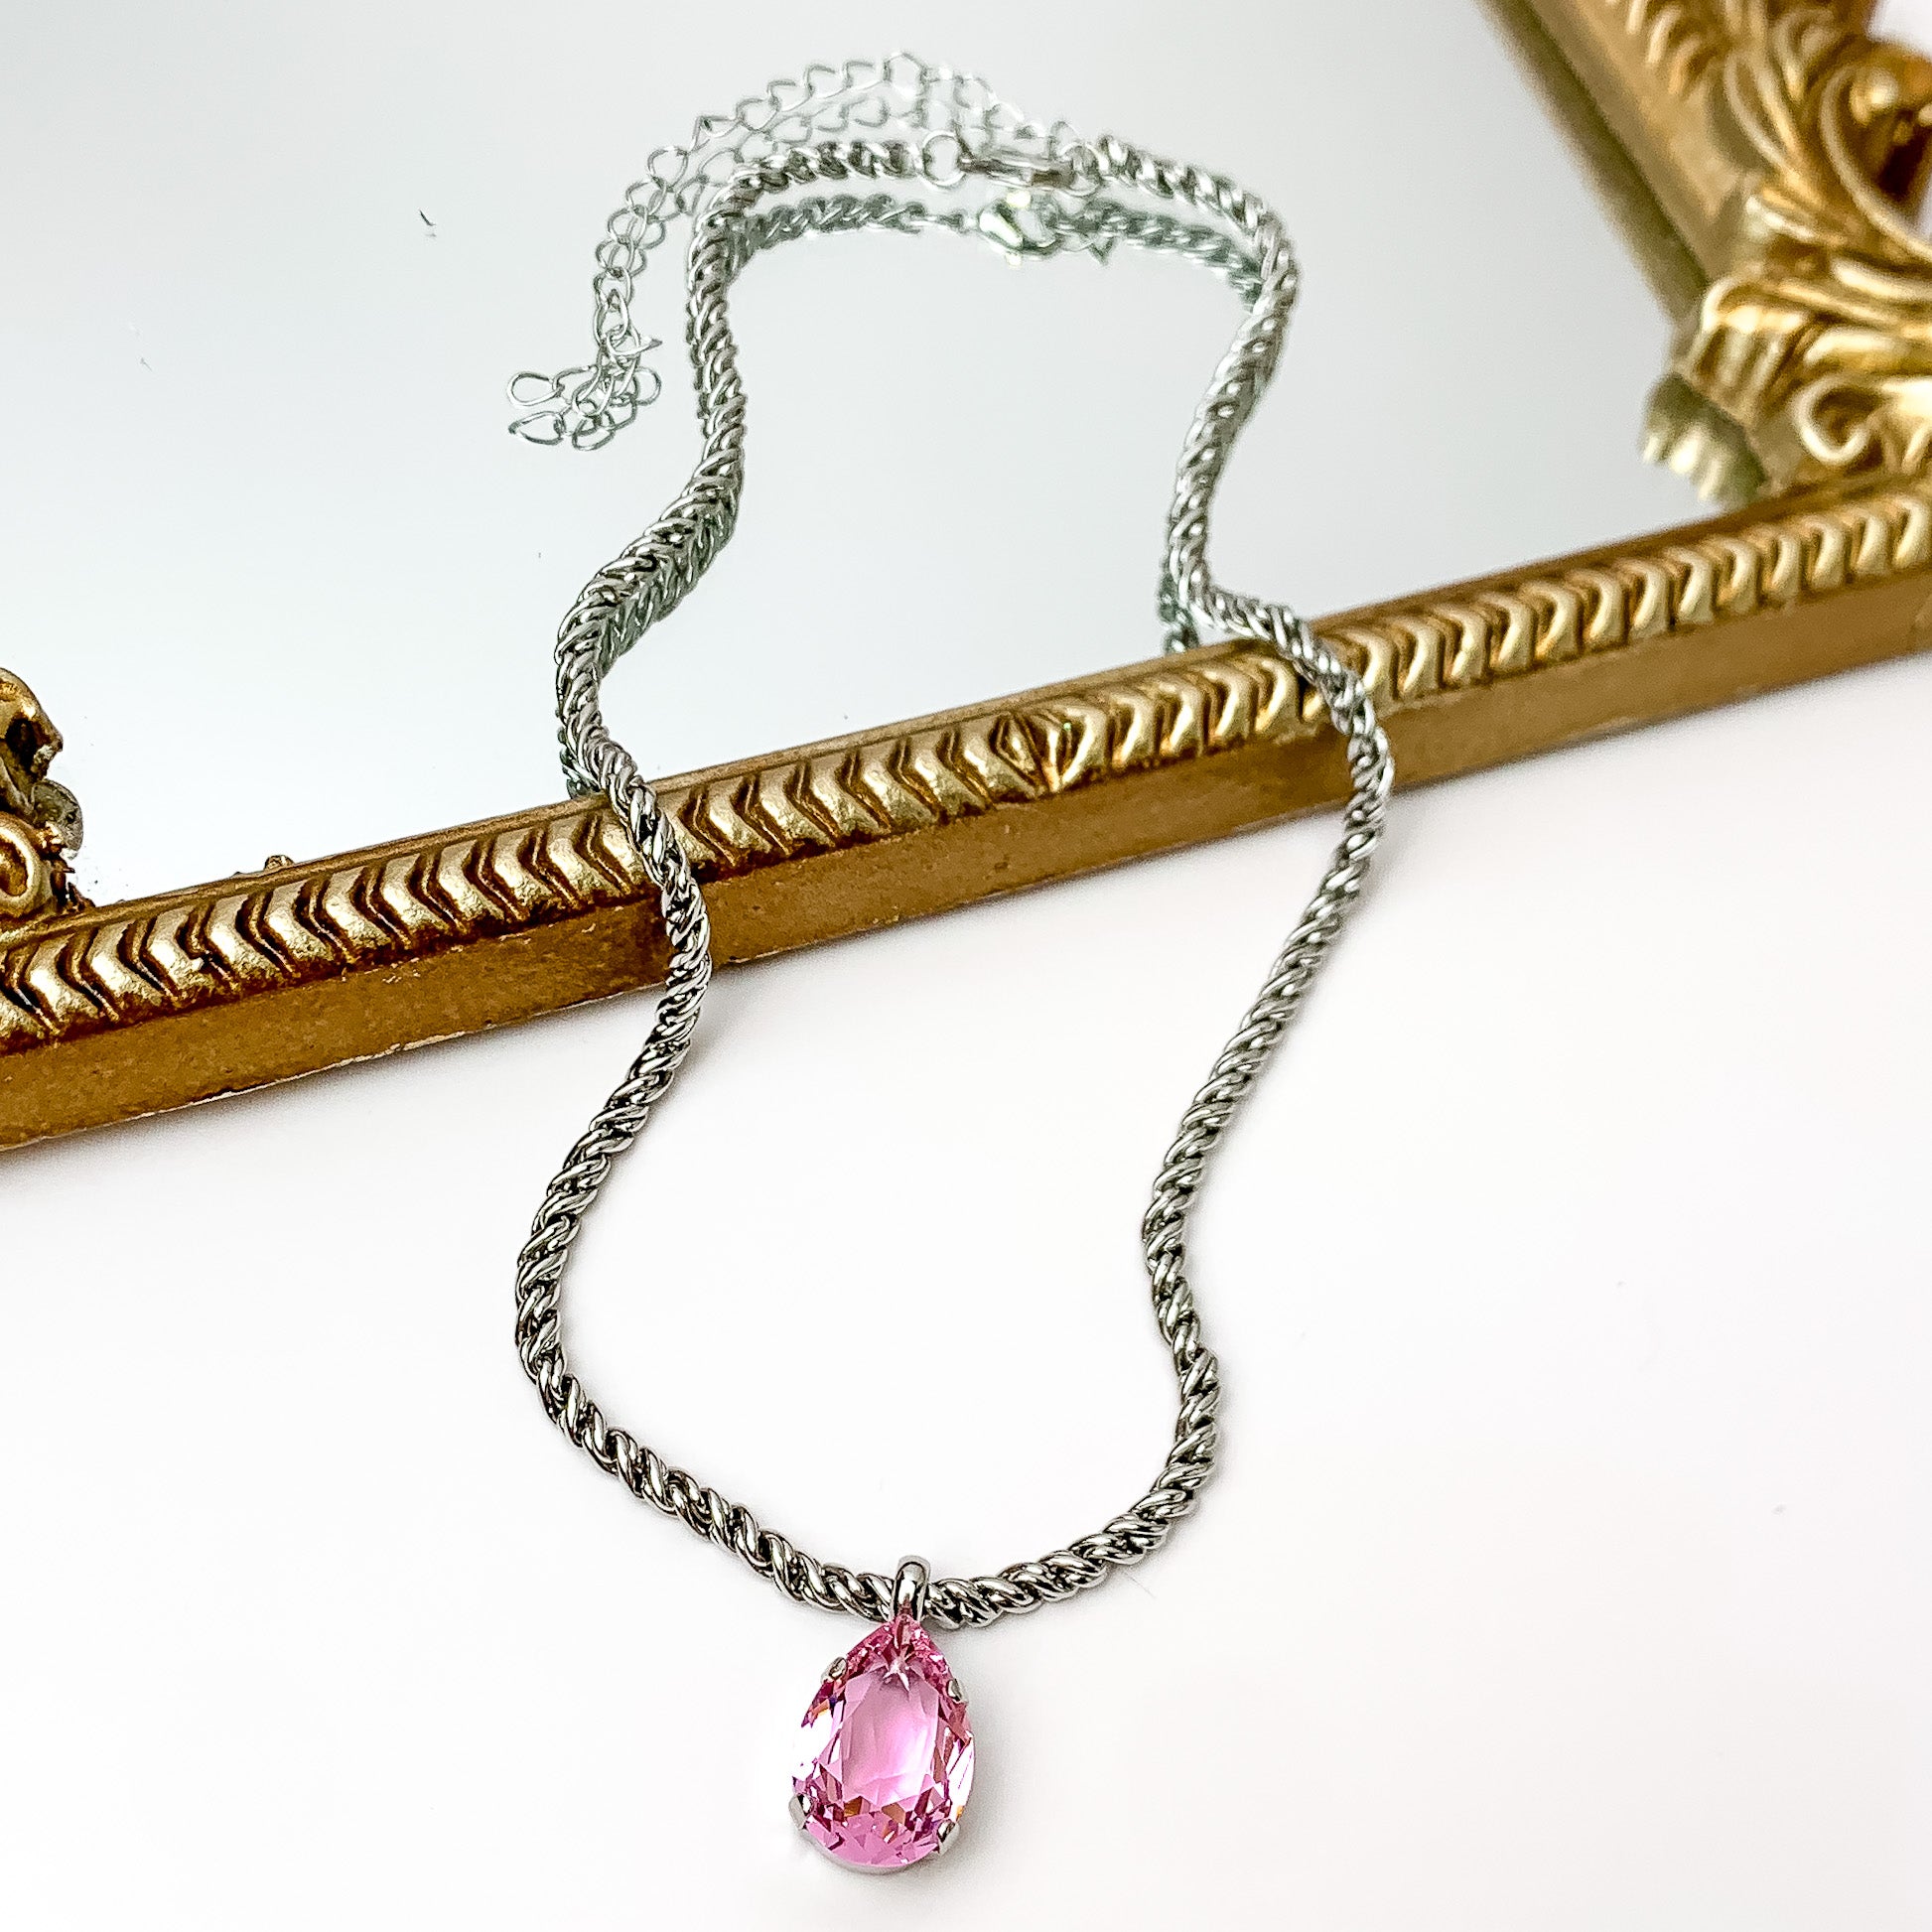 Silver necklace with light pink pendant at the end. Pictured on a white background with a mirror at the top.